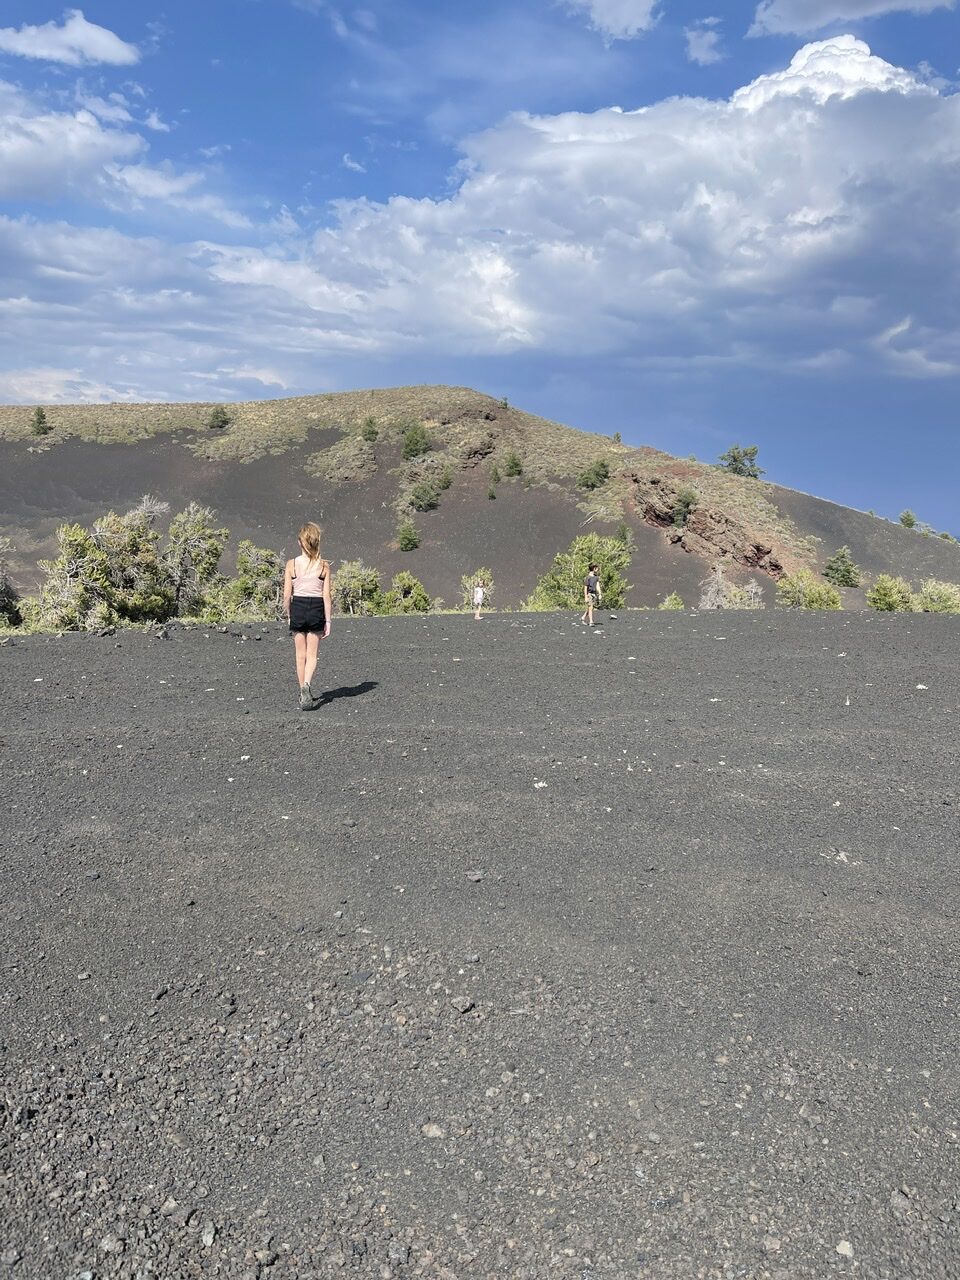 Grass hill with volcanic rocks